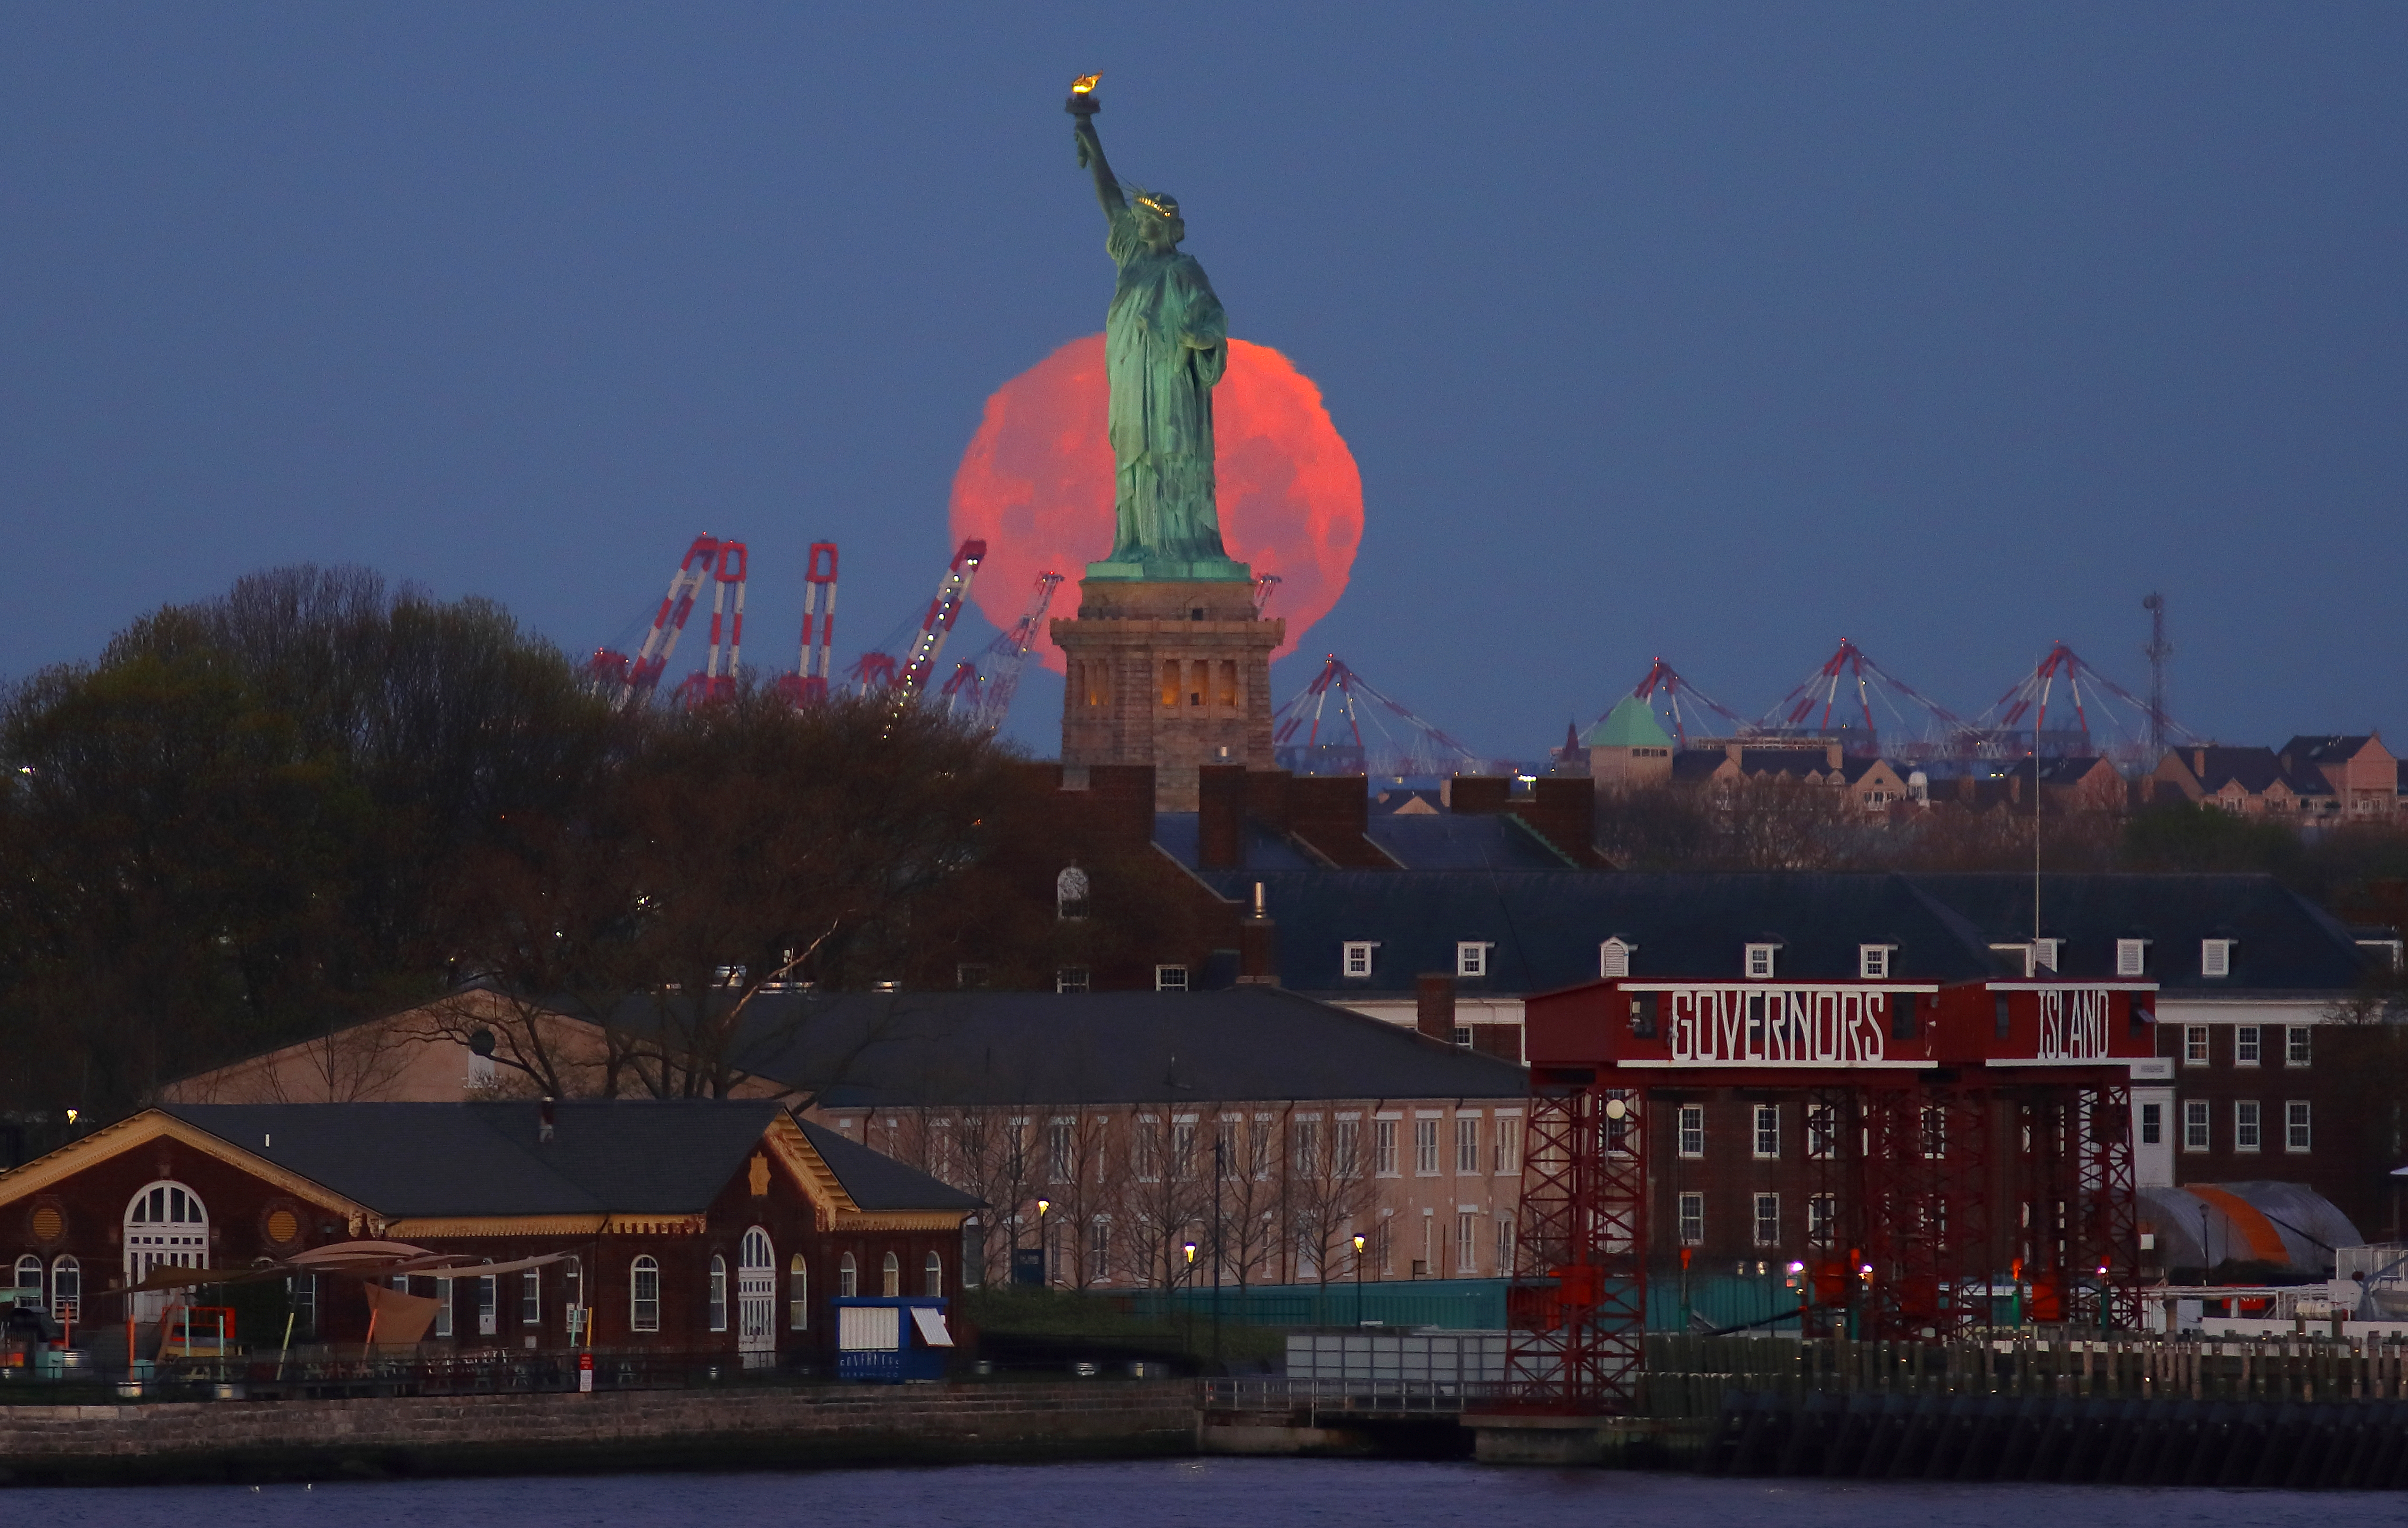 2021's first supermoon: The Pink Moon will light up the sky this month